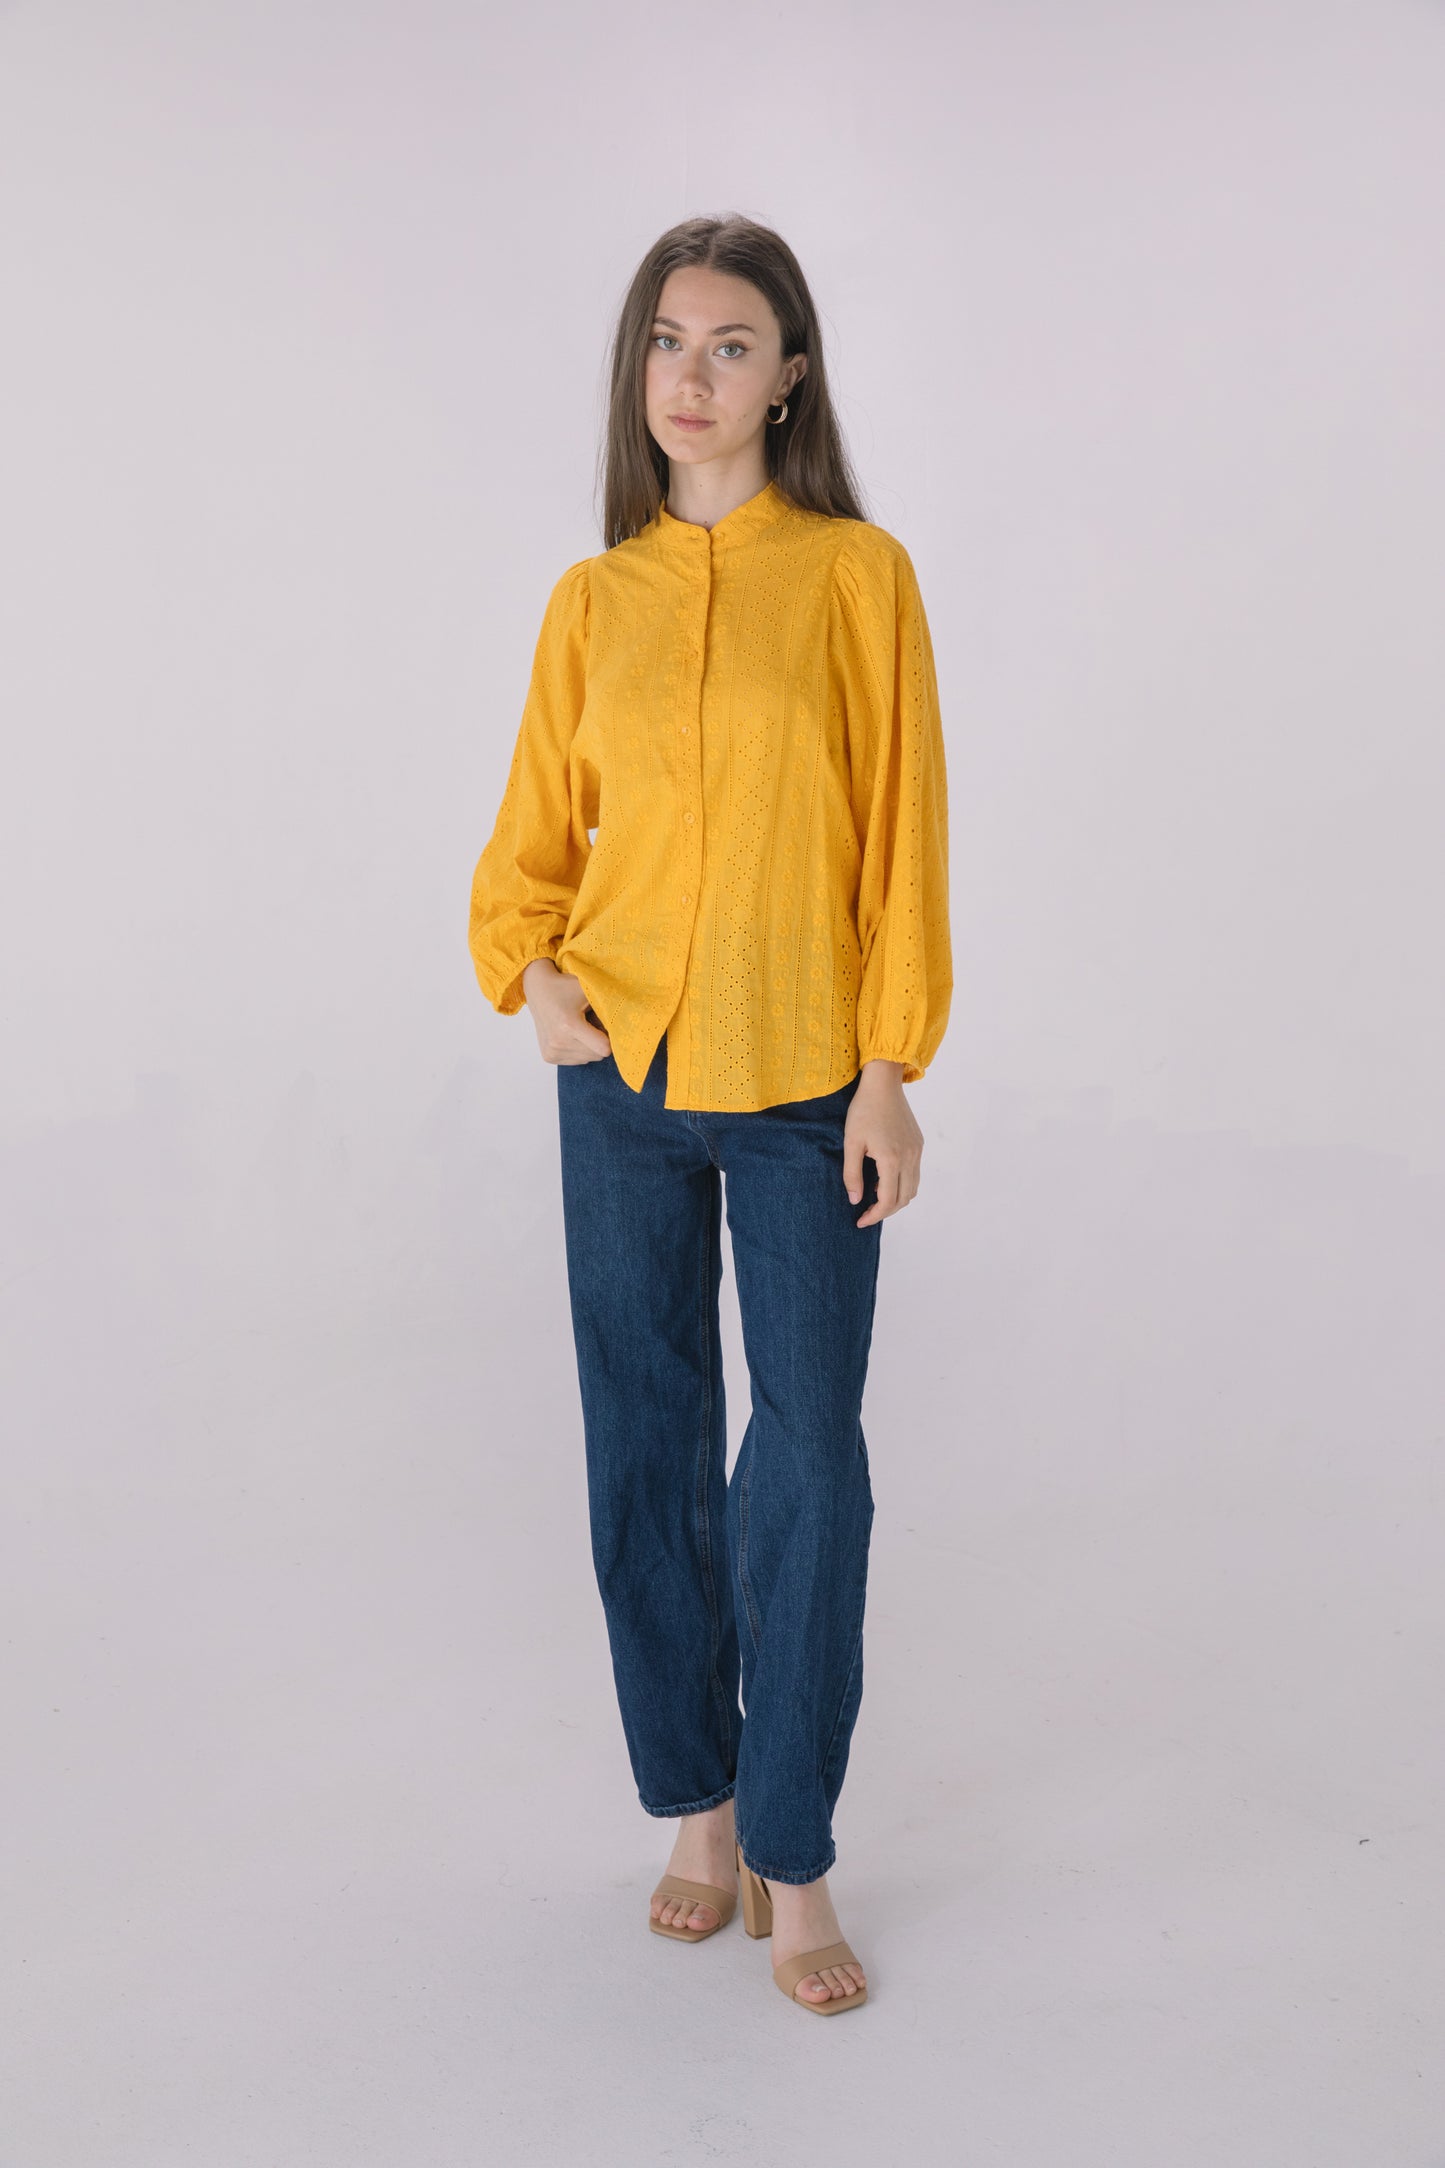 Mustard Embroidered Eyelet Button Down